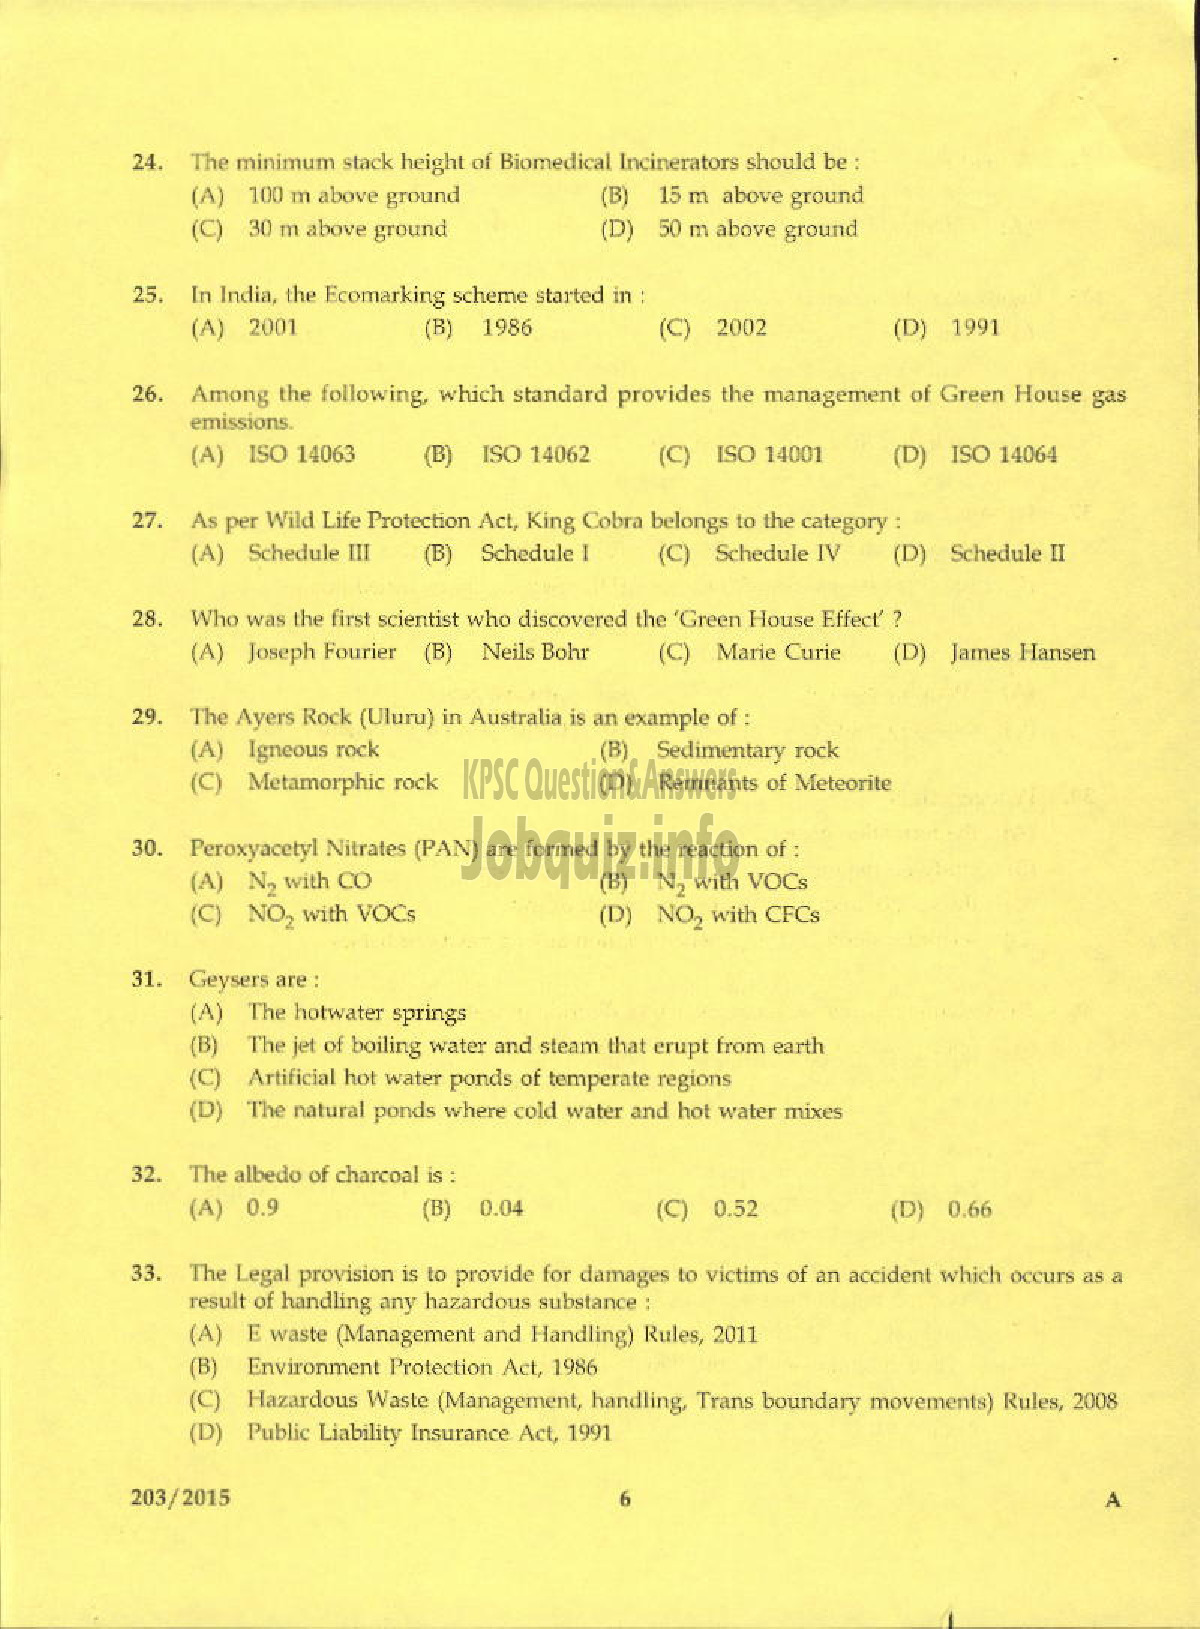 Kerala PSC Question Paper - ASSISTANT ENVIRONMENTAL OFFICER ENVIRONMENT AND CLIMATE CHANGE-4